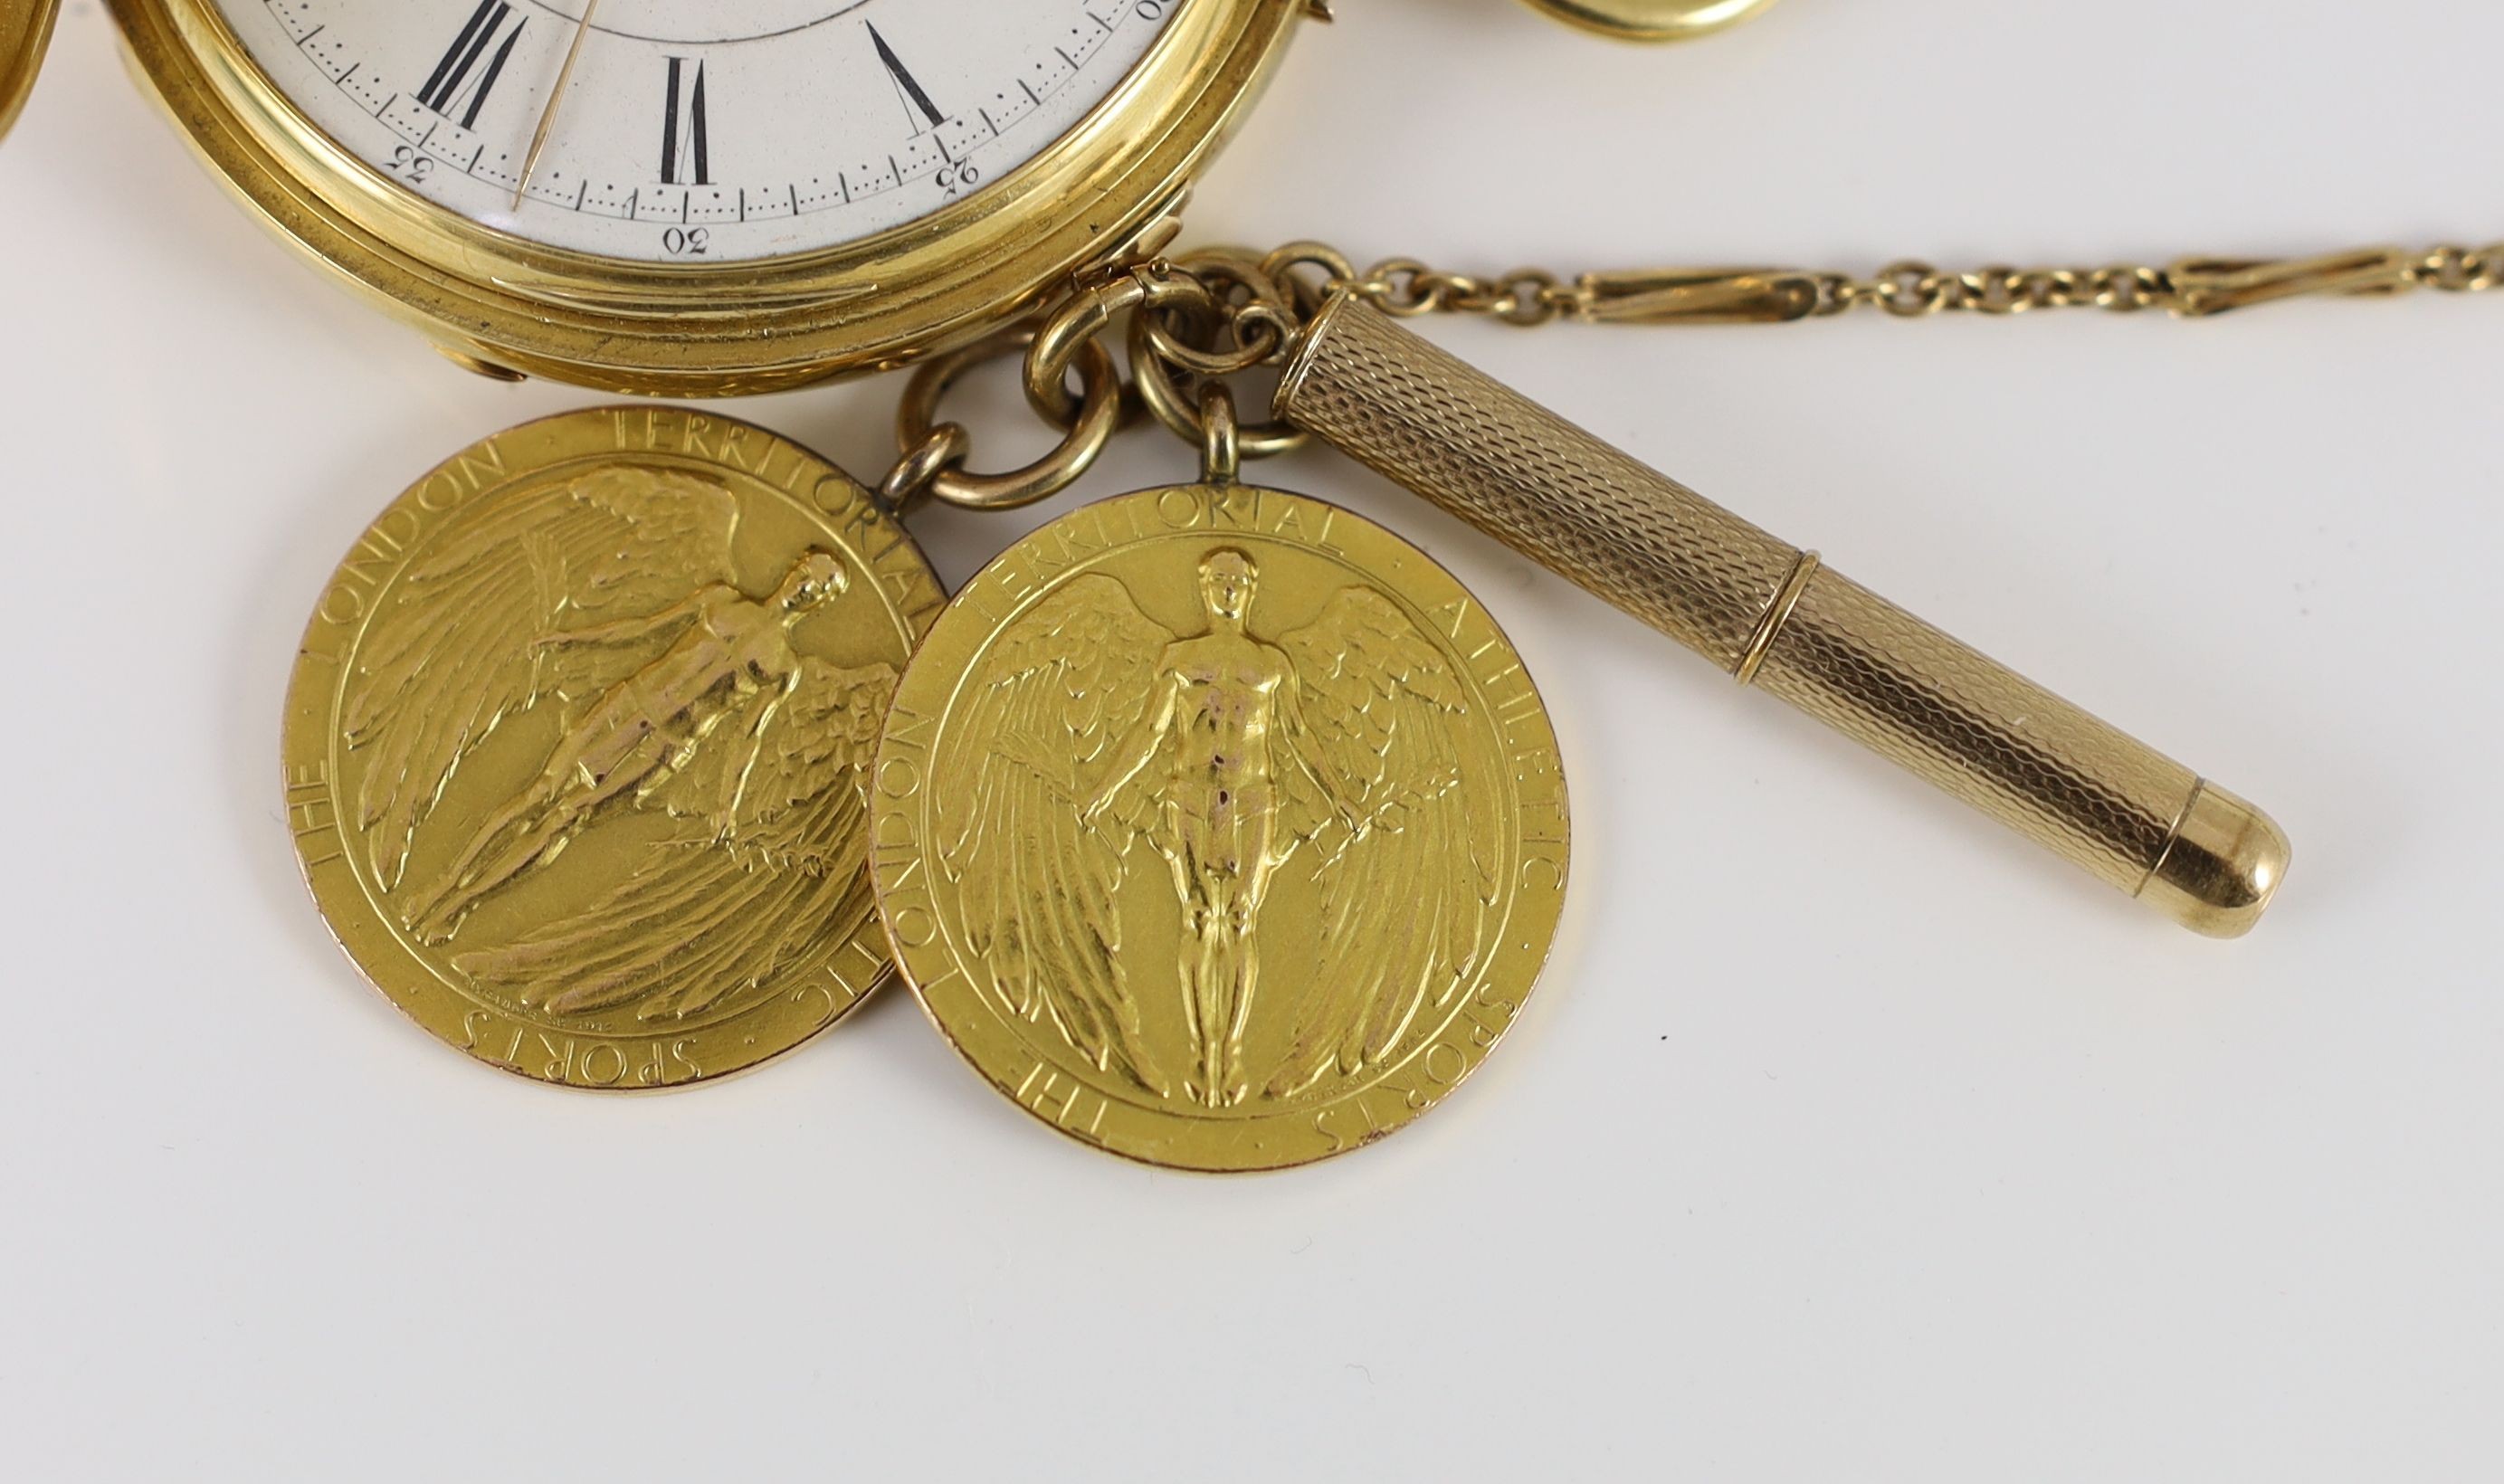 A Victorian 18ct gold keyless chronograph hunter pocket watch, by Boxelle, Kings Road, Brighton